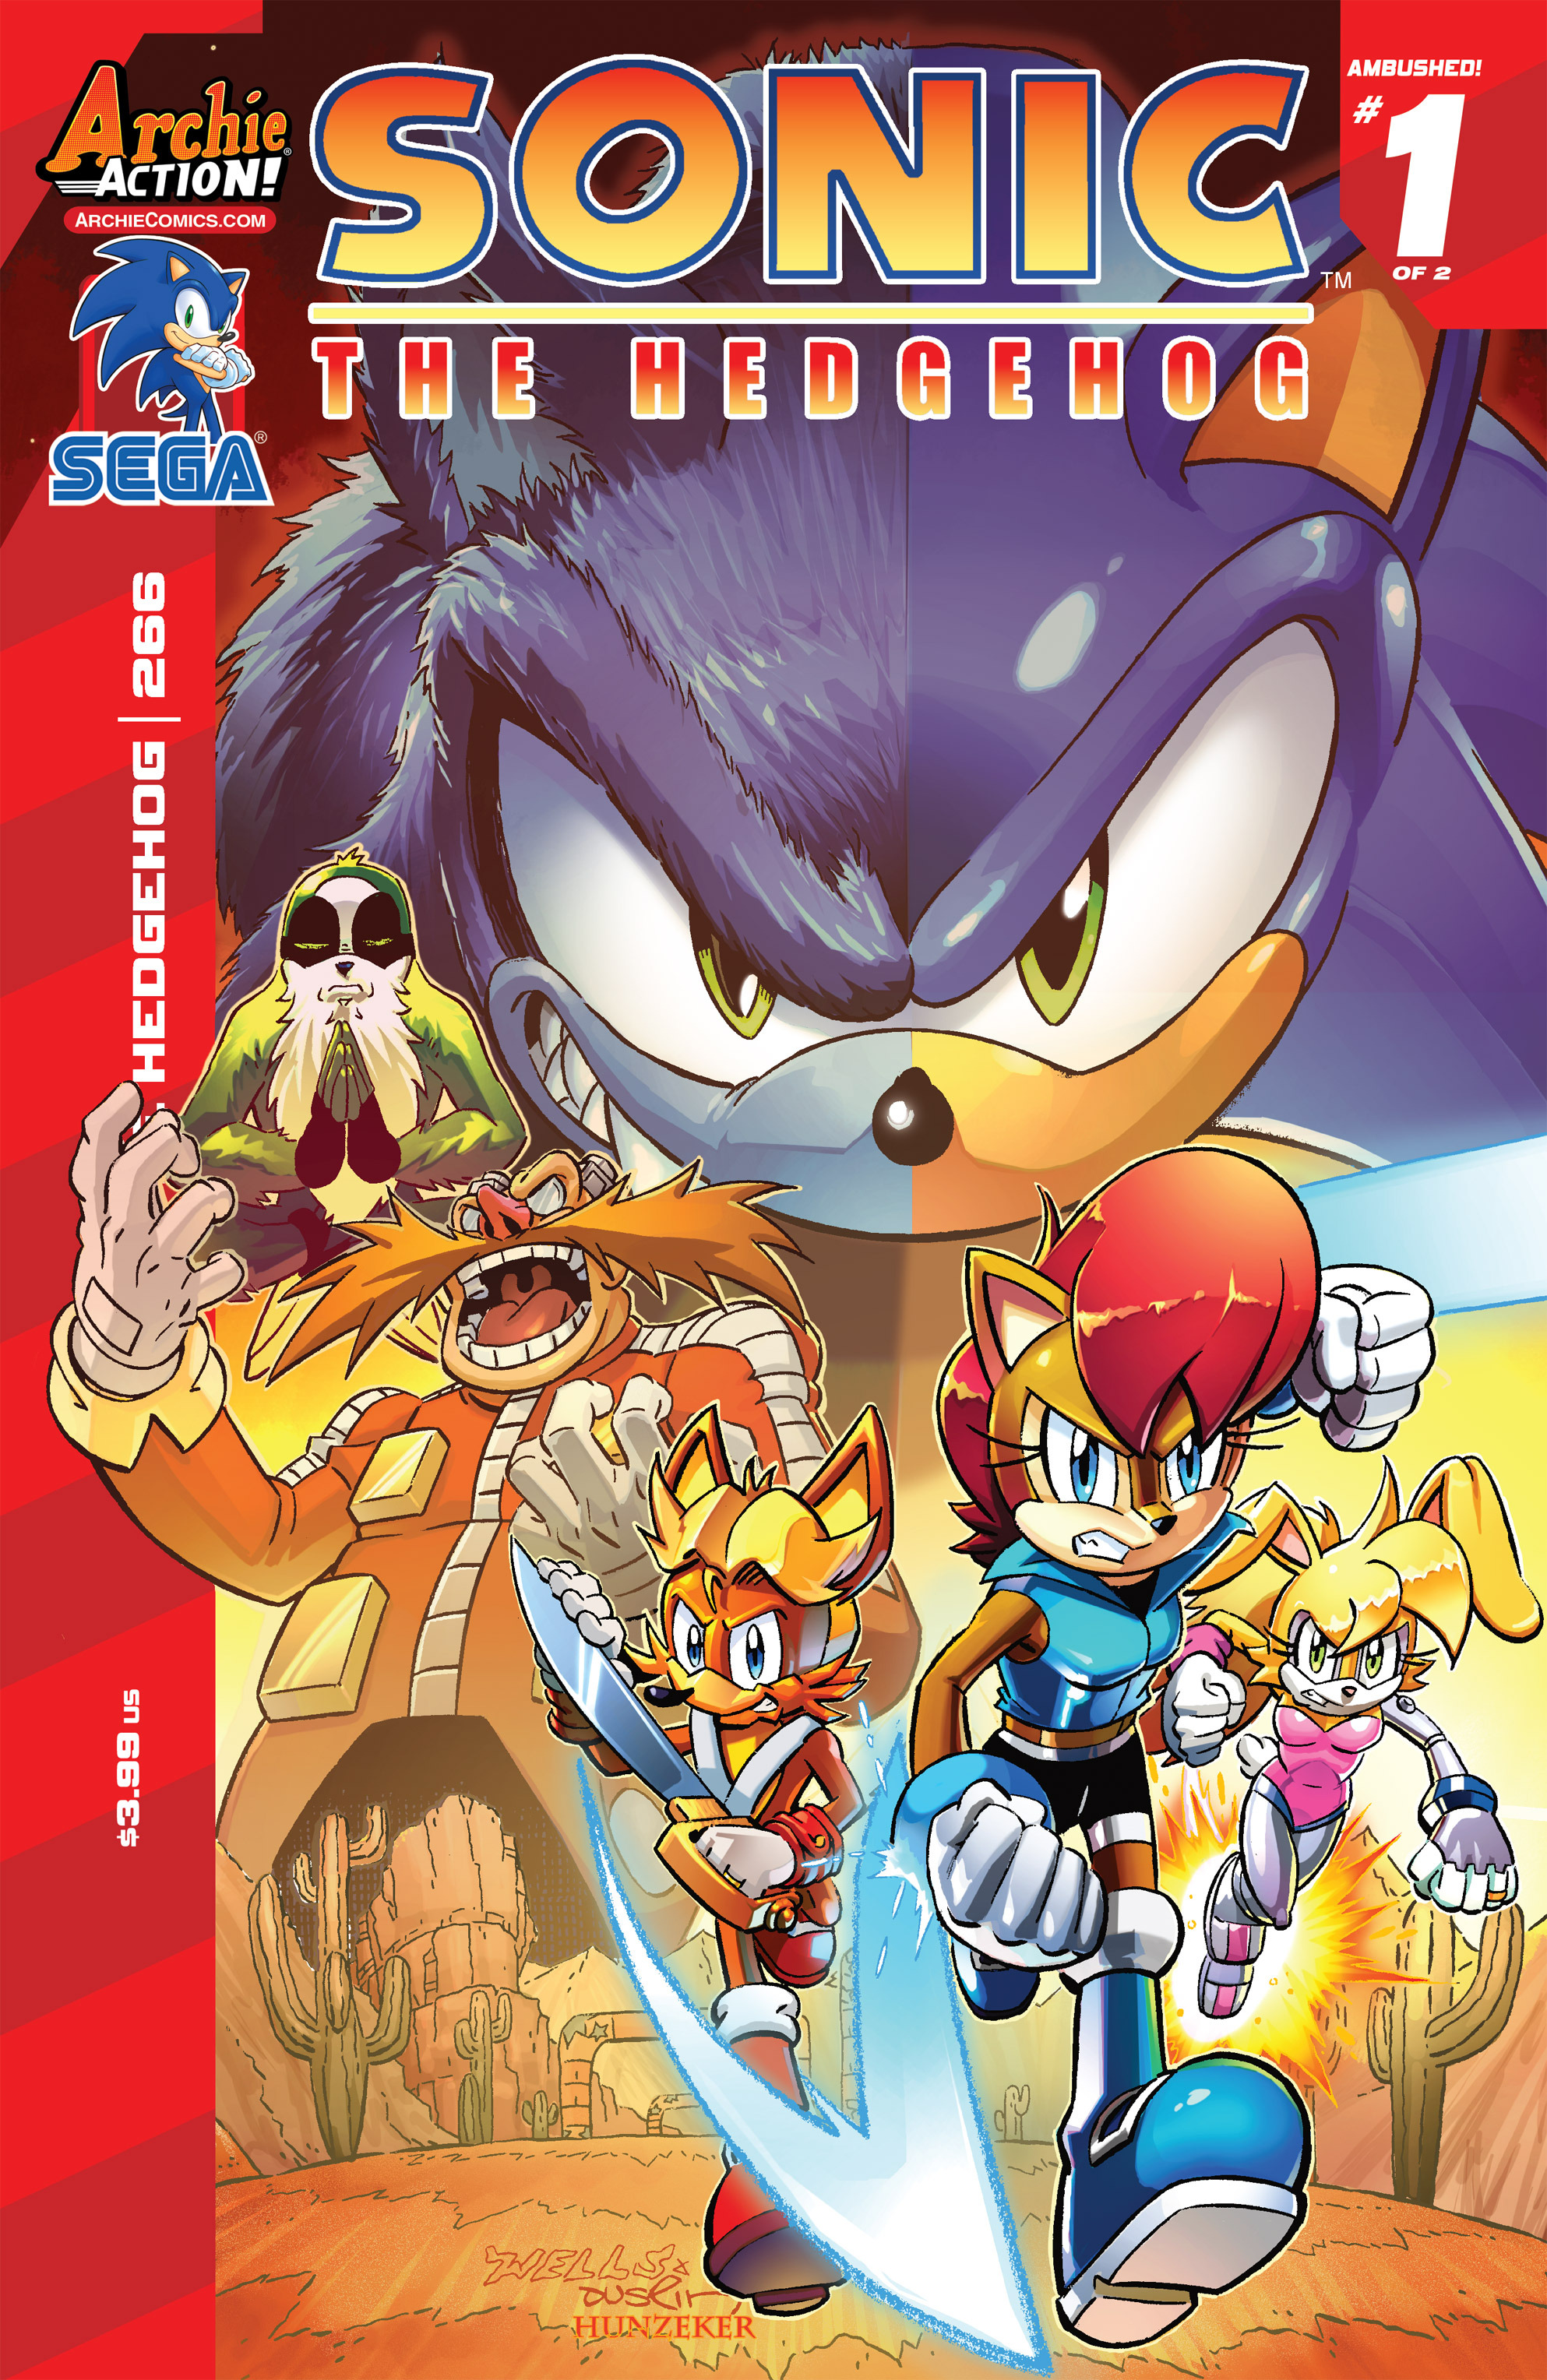 sonic the comic characters